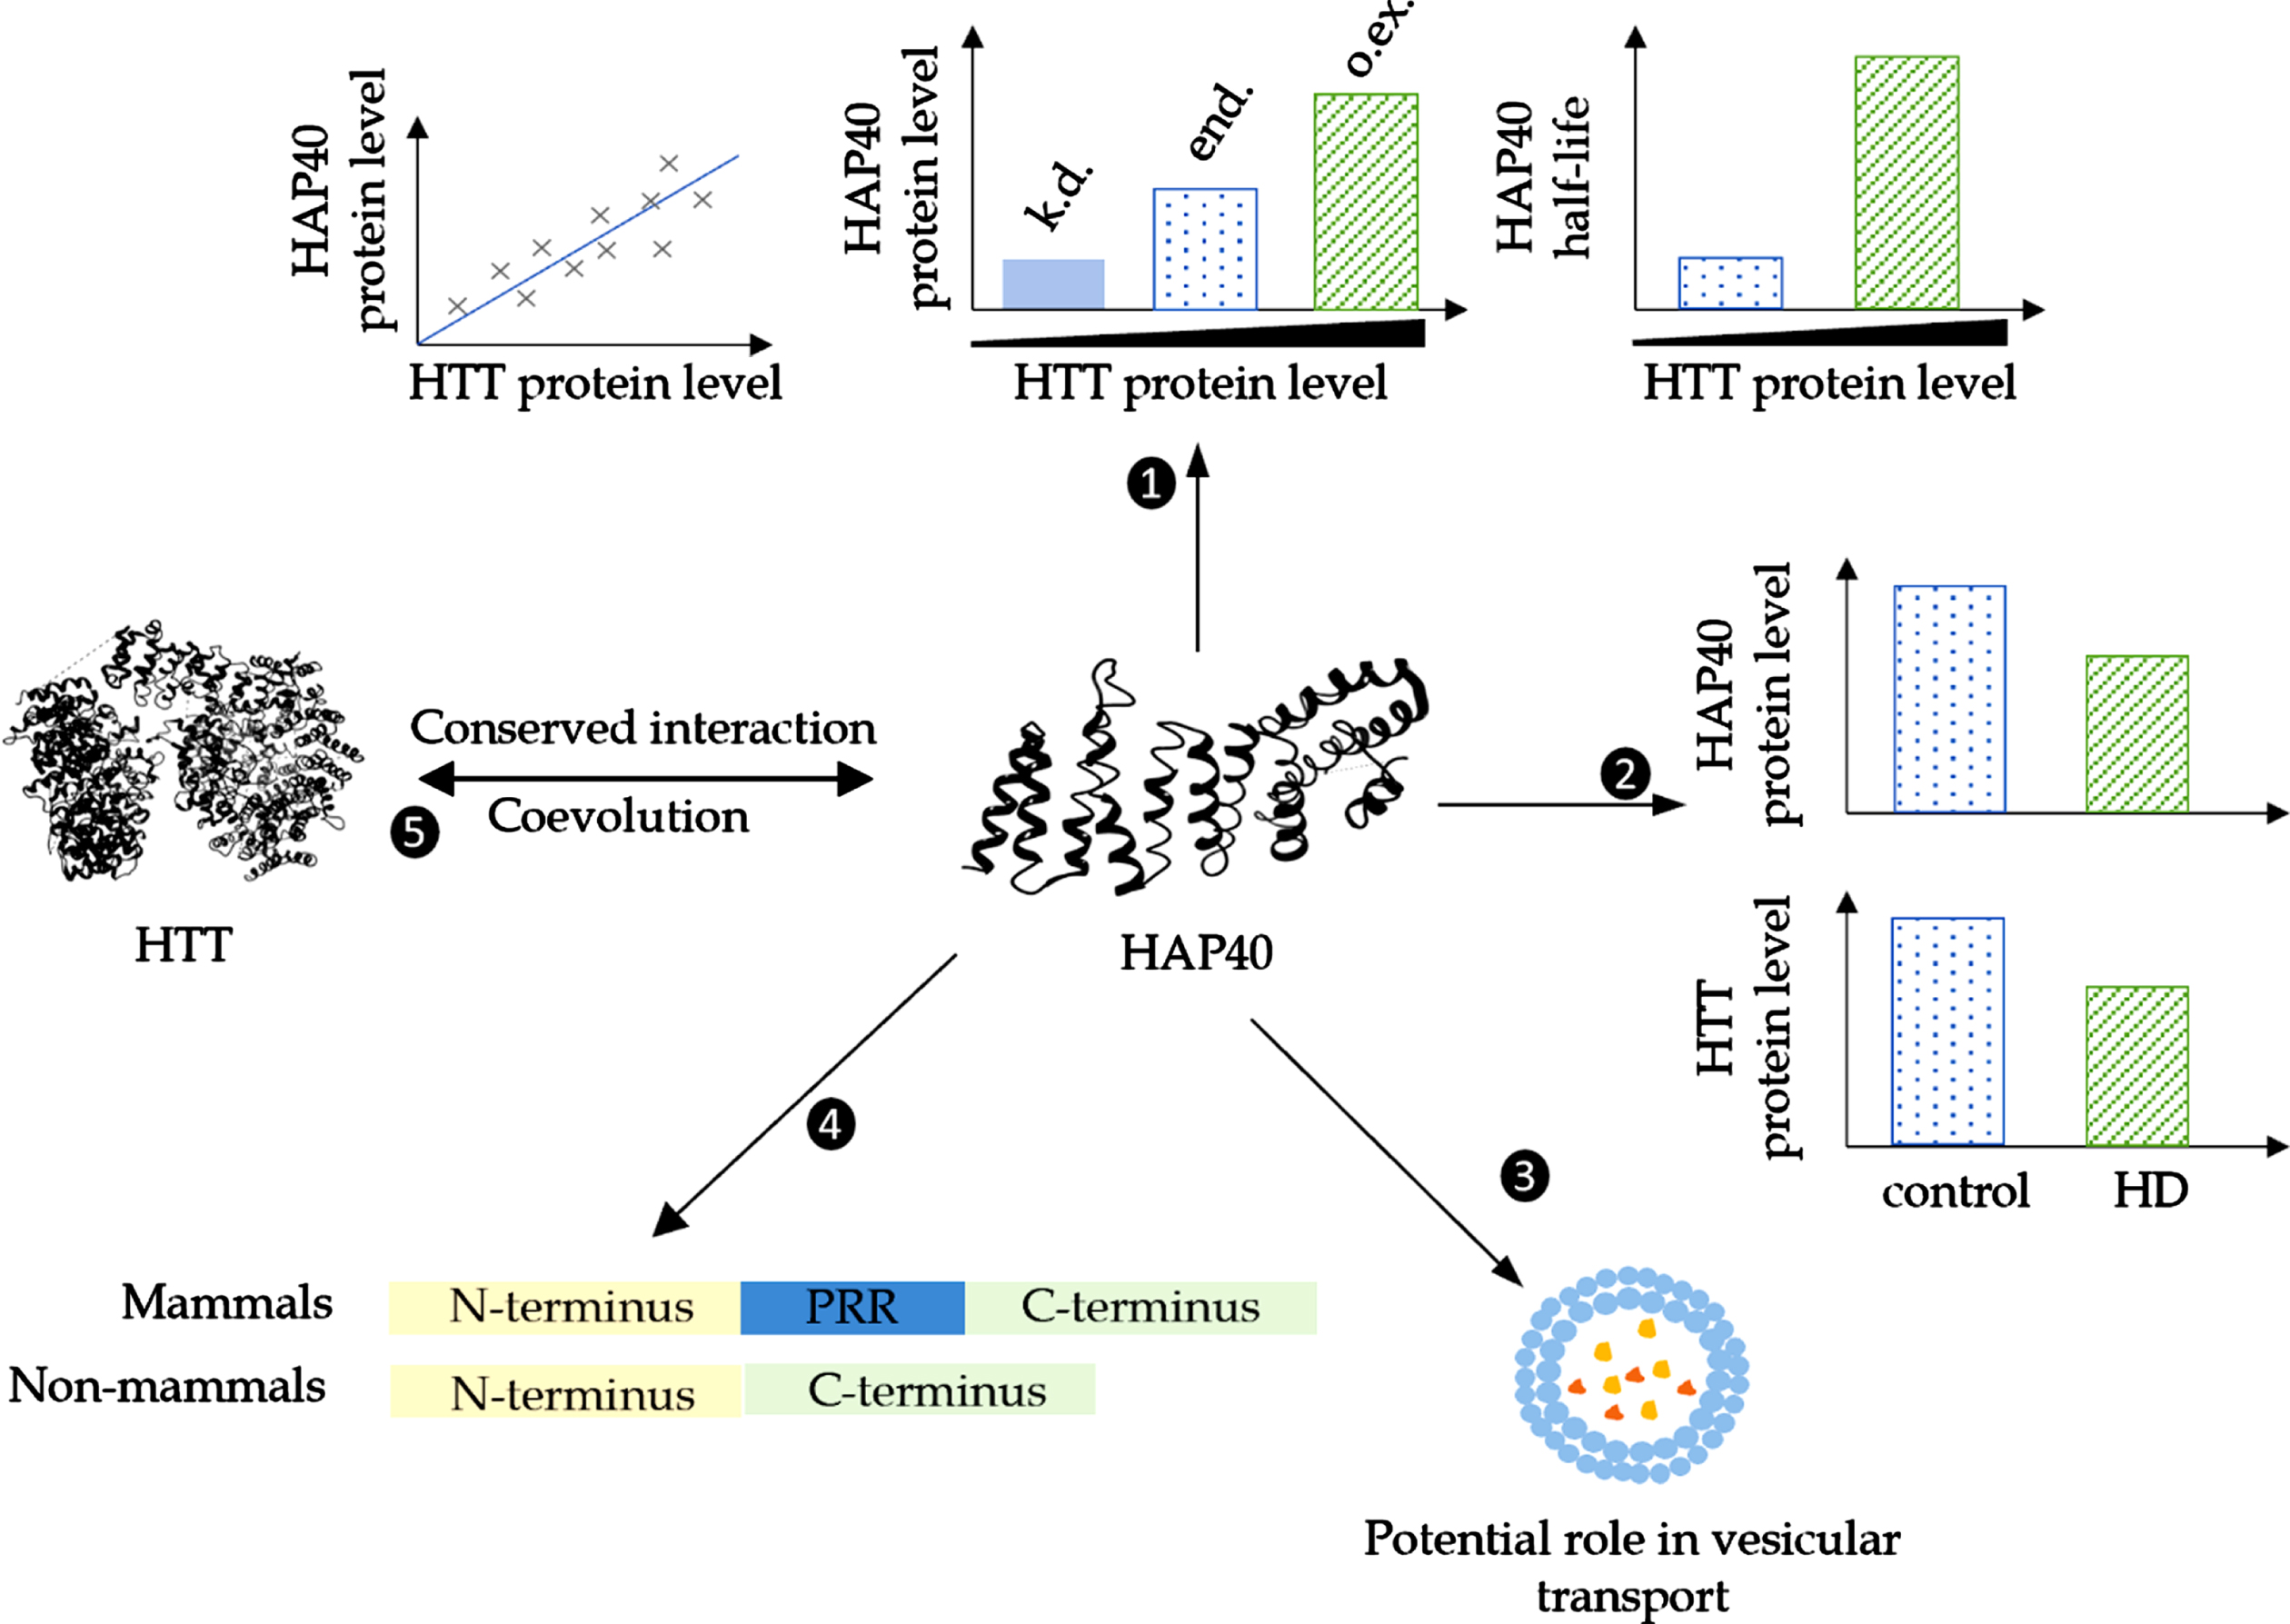 Current knowledge of HAP40 and its interaction with HTT. (1) HAP40 protein levels directly depend on HTT levels in several tissues [46] and (2) the levels of both proteins are reduced in HD [47, 57, 58]. (3) Previous studies indicated a potential role of HAP40 in vesicular transport through an interaction with the Ras-related protein 5 [59, 60] or the close homology between HAP40 and the N-ethylmaleimide-sensitive factor attachment protein α, β, and γ [40]. (4) Further, mammalian HAP40 has a centrally located and mammalian-specific proline-rich region [40]. (5) The conserved interaction between HAP40 and HTT in metazoans and the coevolution between both proteins [40] further corroborates the functional importance of the HTT-HAP40 interaction. k.d., HTT knock-down; end., endogenous HTT expression; o.ex., over-expression of HTT.